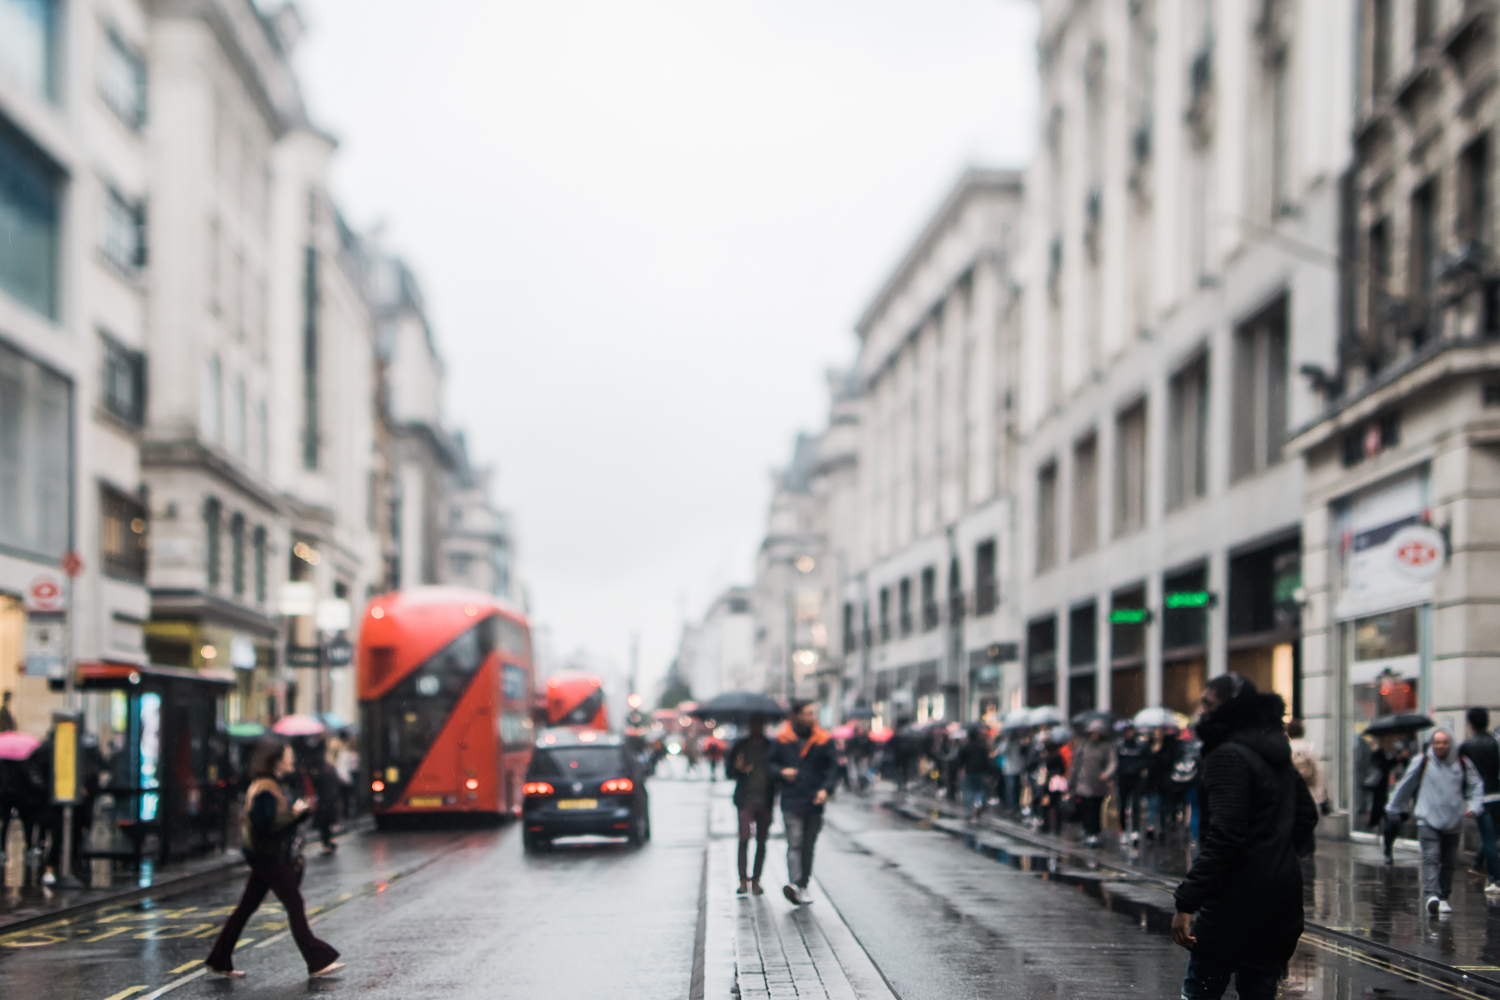 Freelensed photograph of London Oxford Circus in the rain